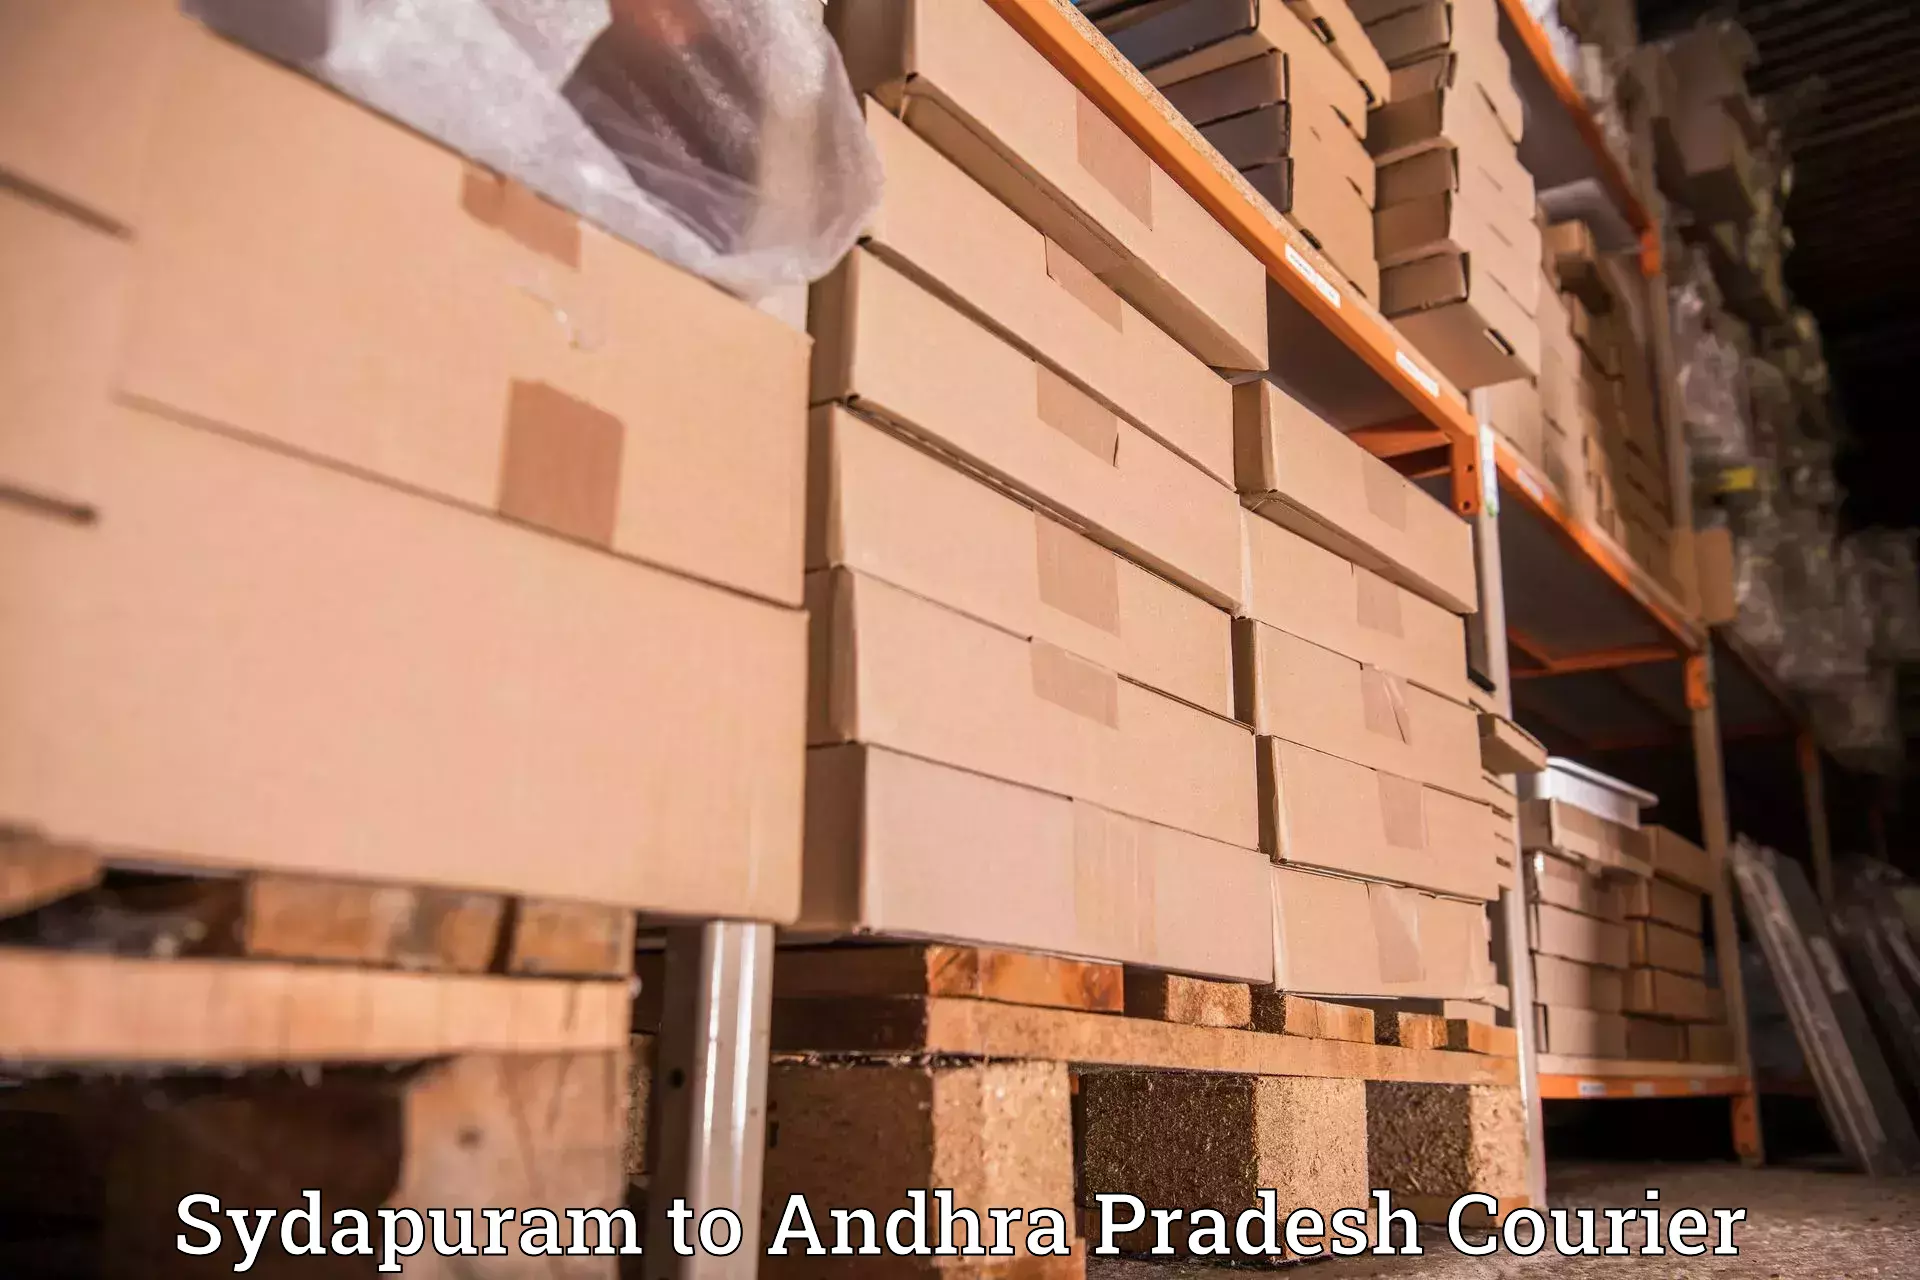 Easy access courier services Sydapuram to Kambadur